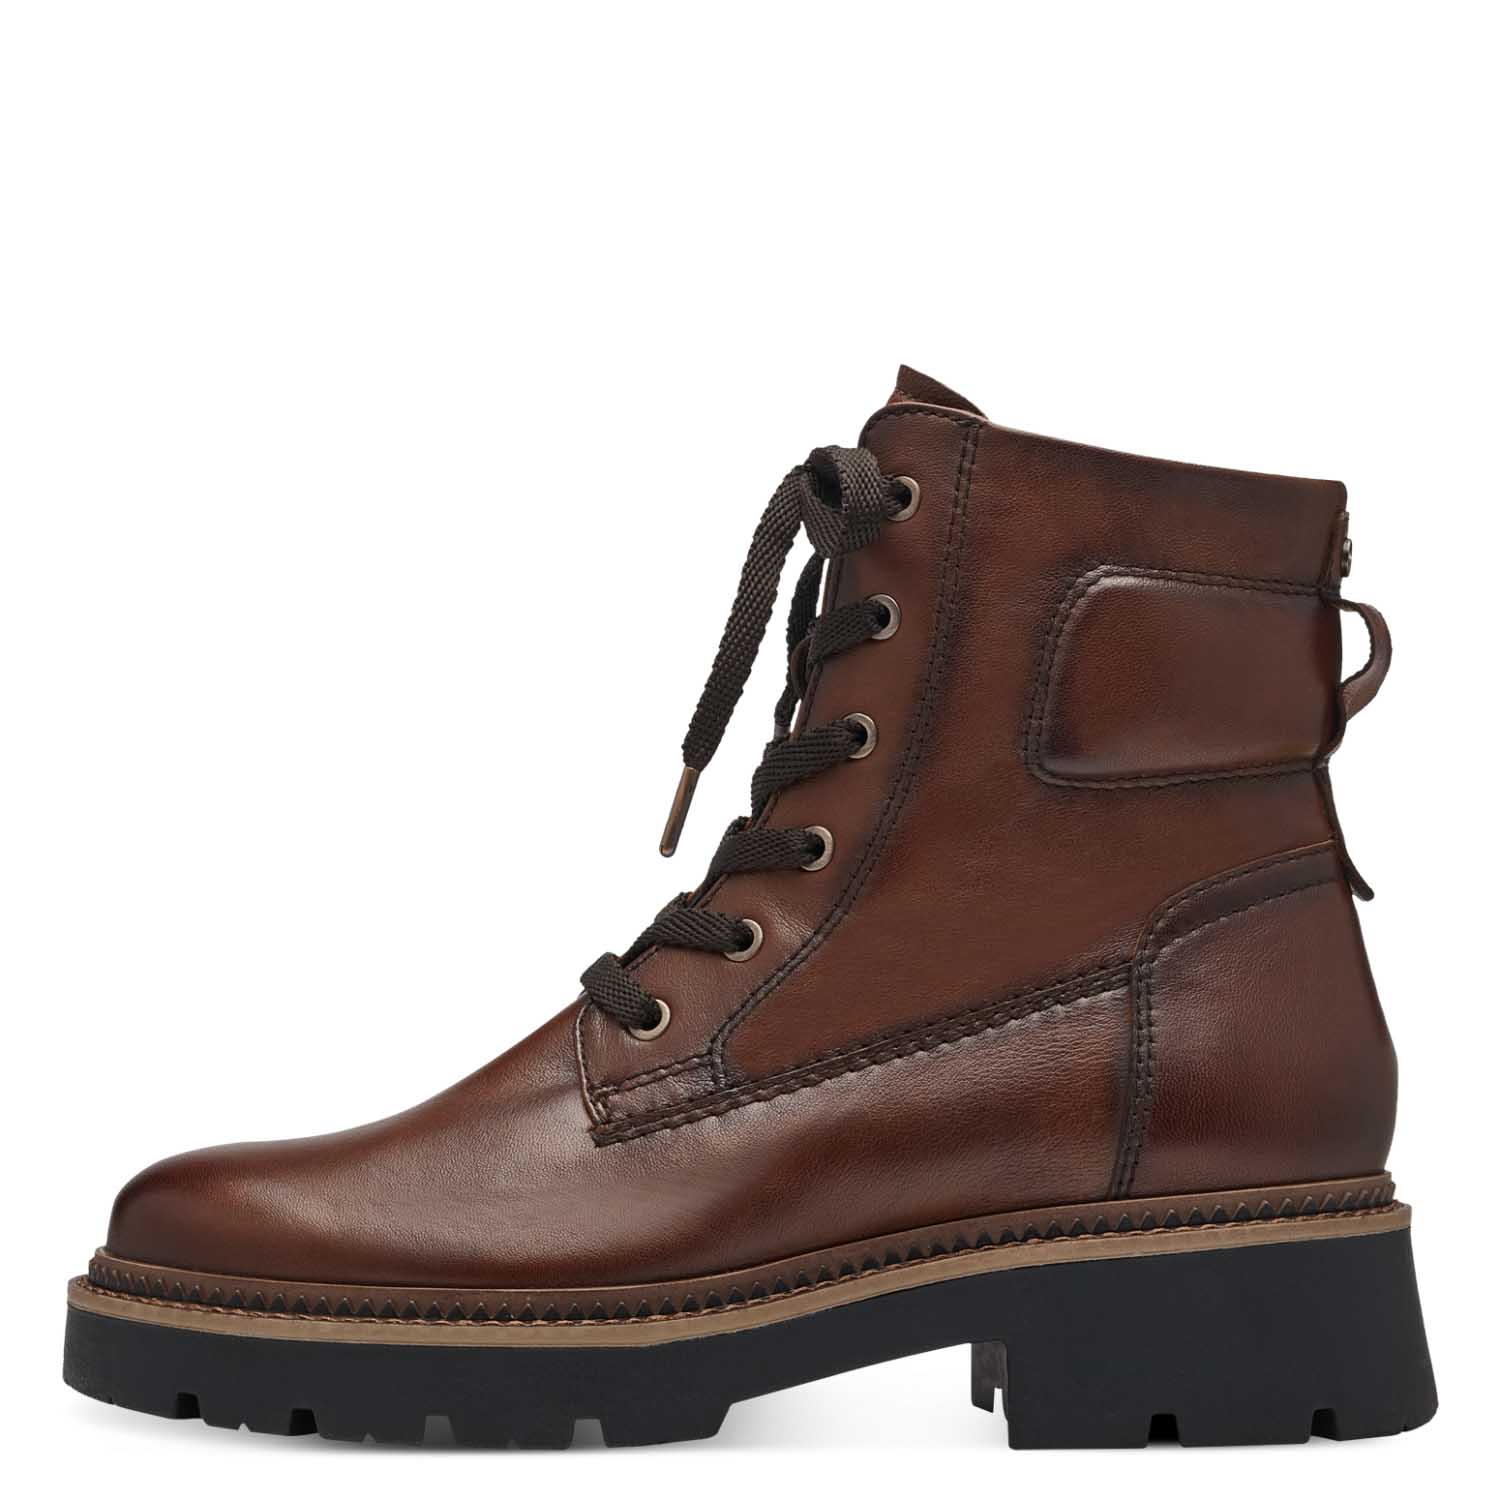 Front view of Tamaris leather brown lace up boot.